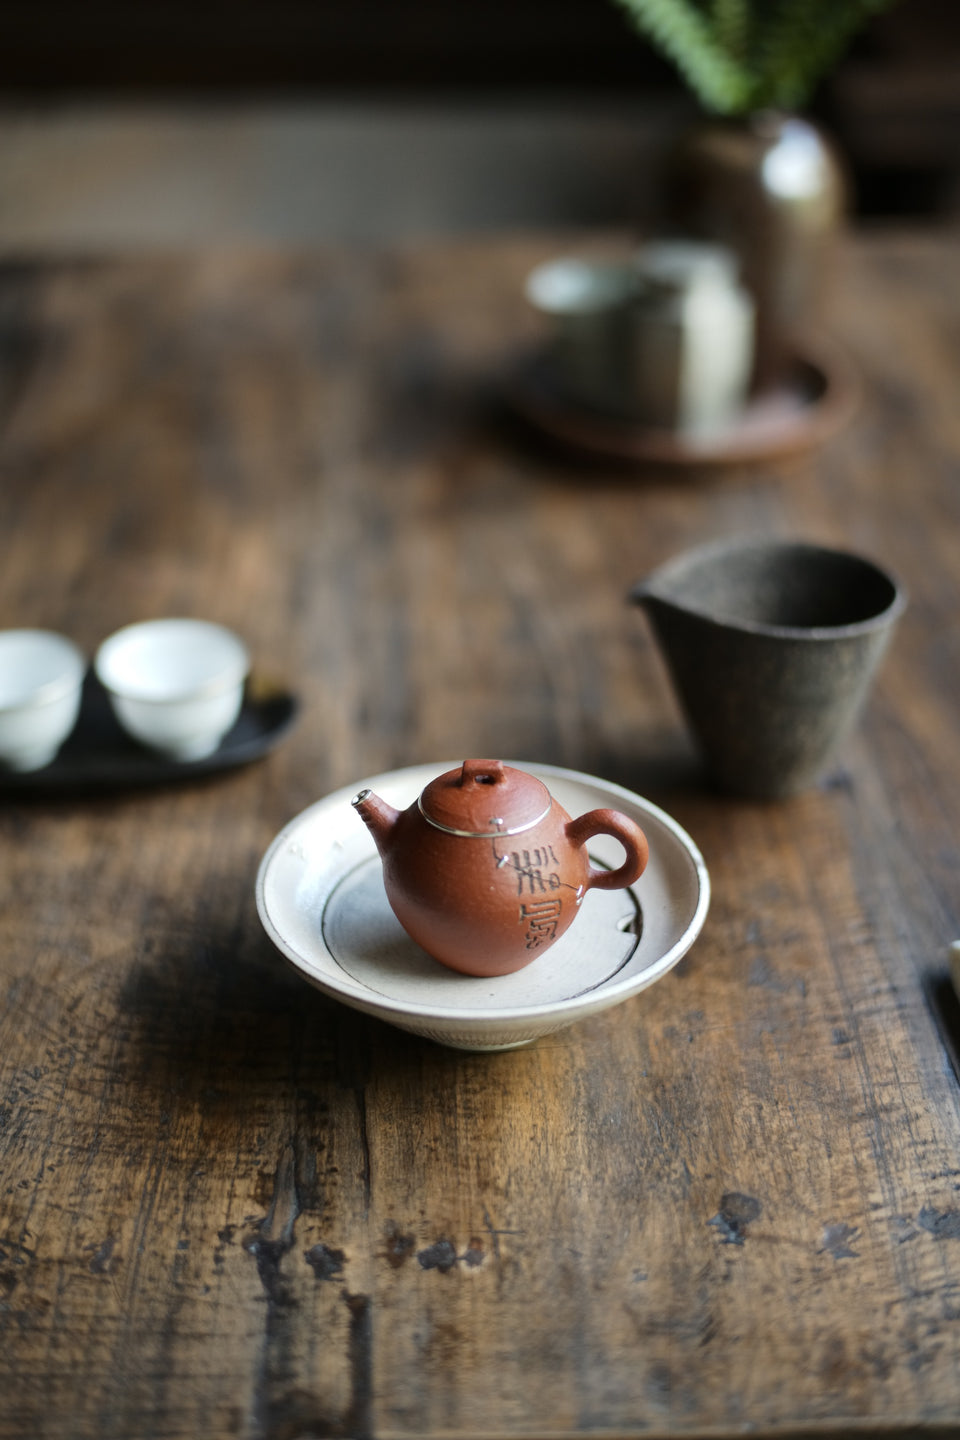 Limited Edition Huishan Red, Silver, & Calligraphy Teapot by Cheng Wei